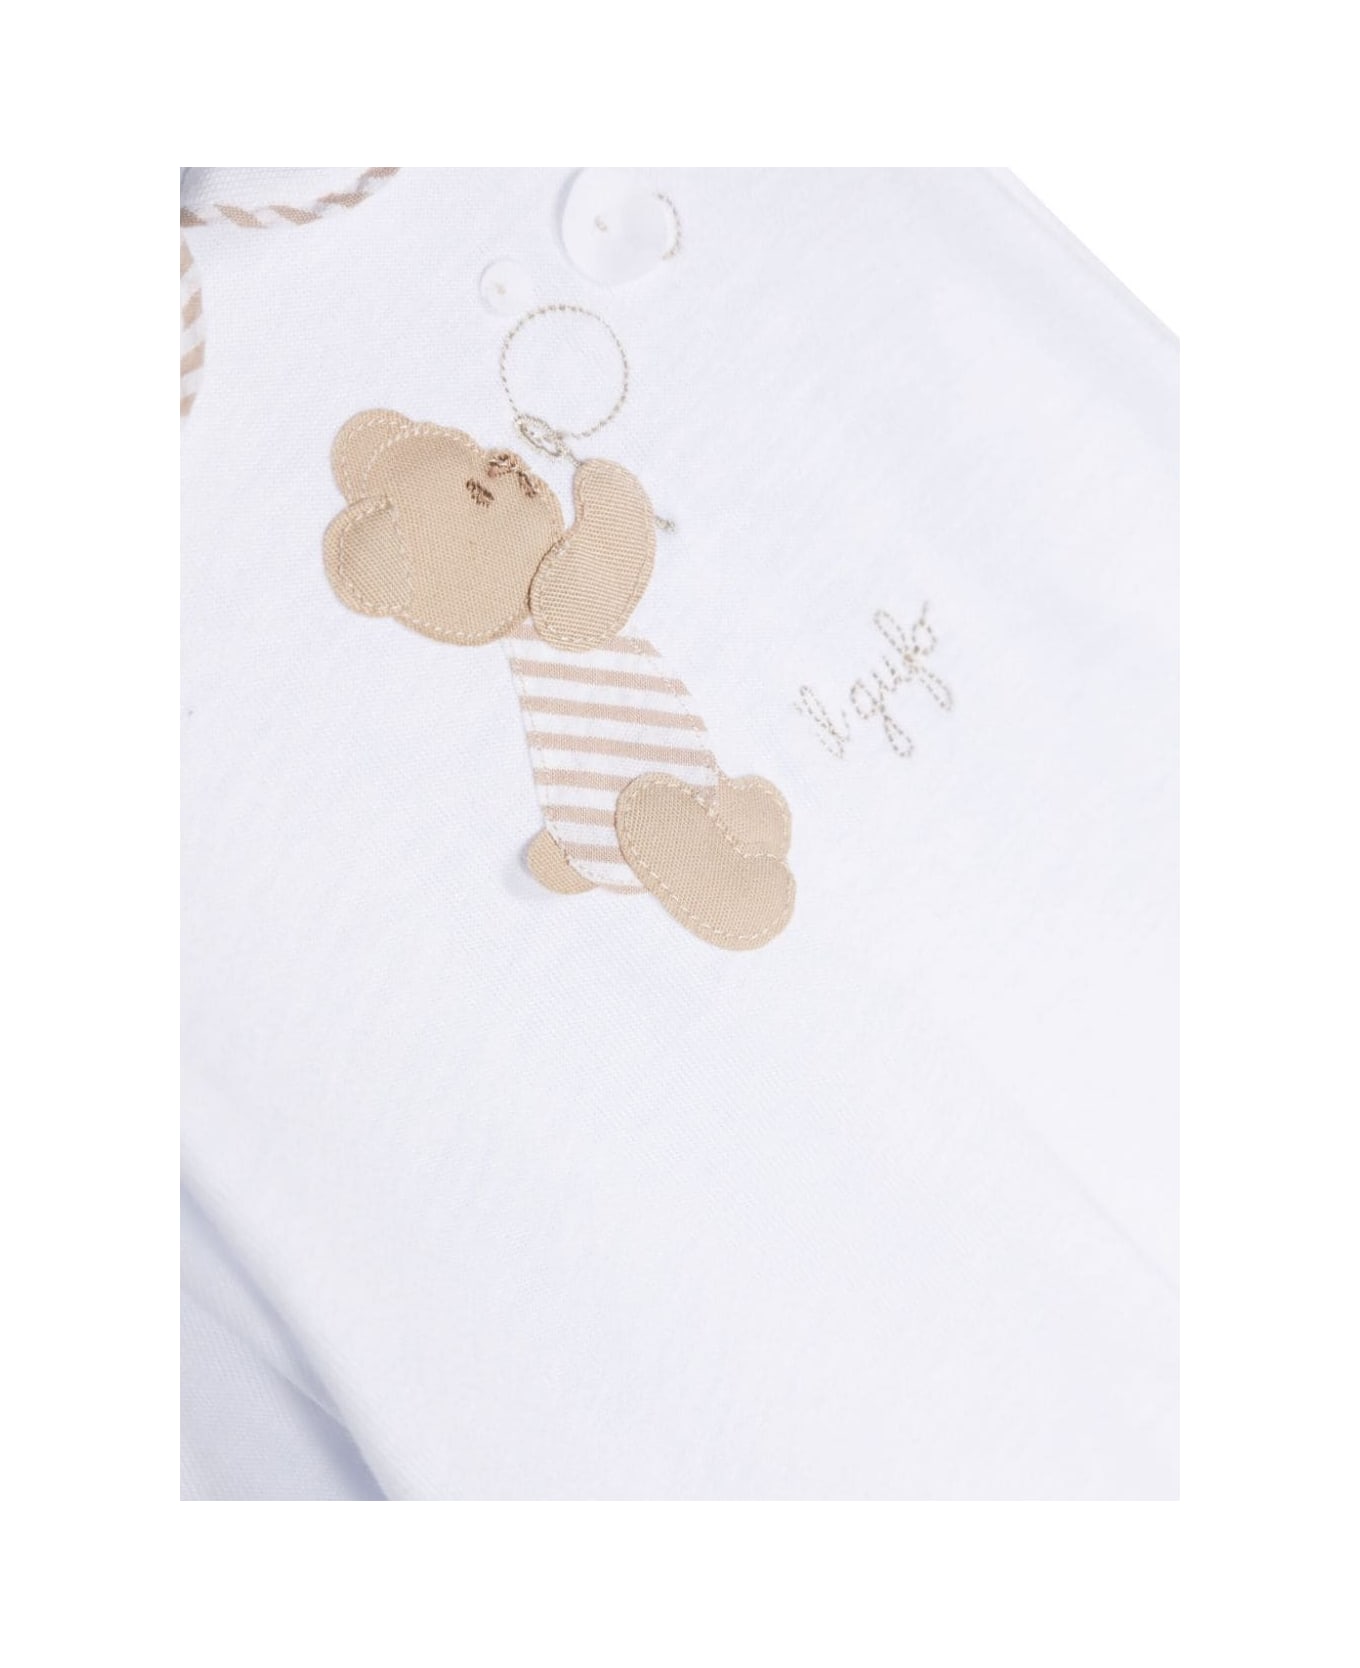 Il Gufo White Playsuit With Feet And Teddy-bear Embellishment - Brown